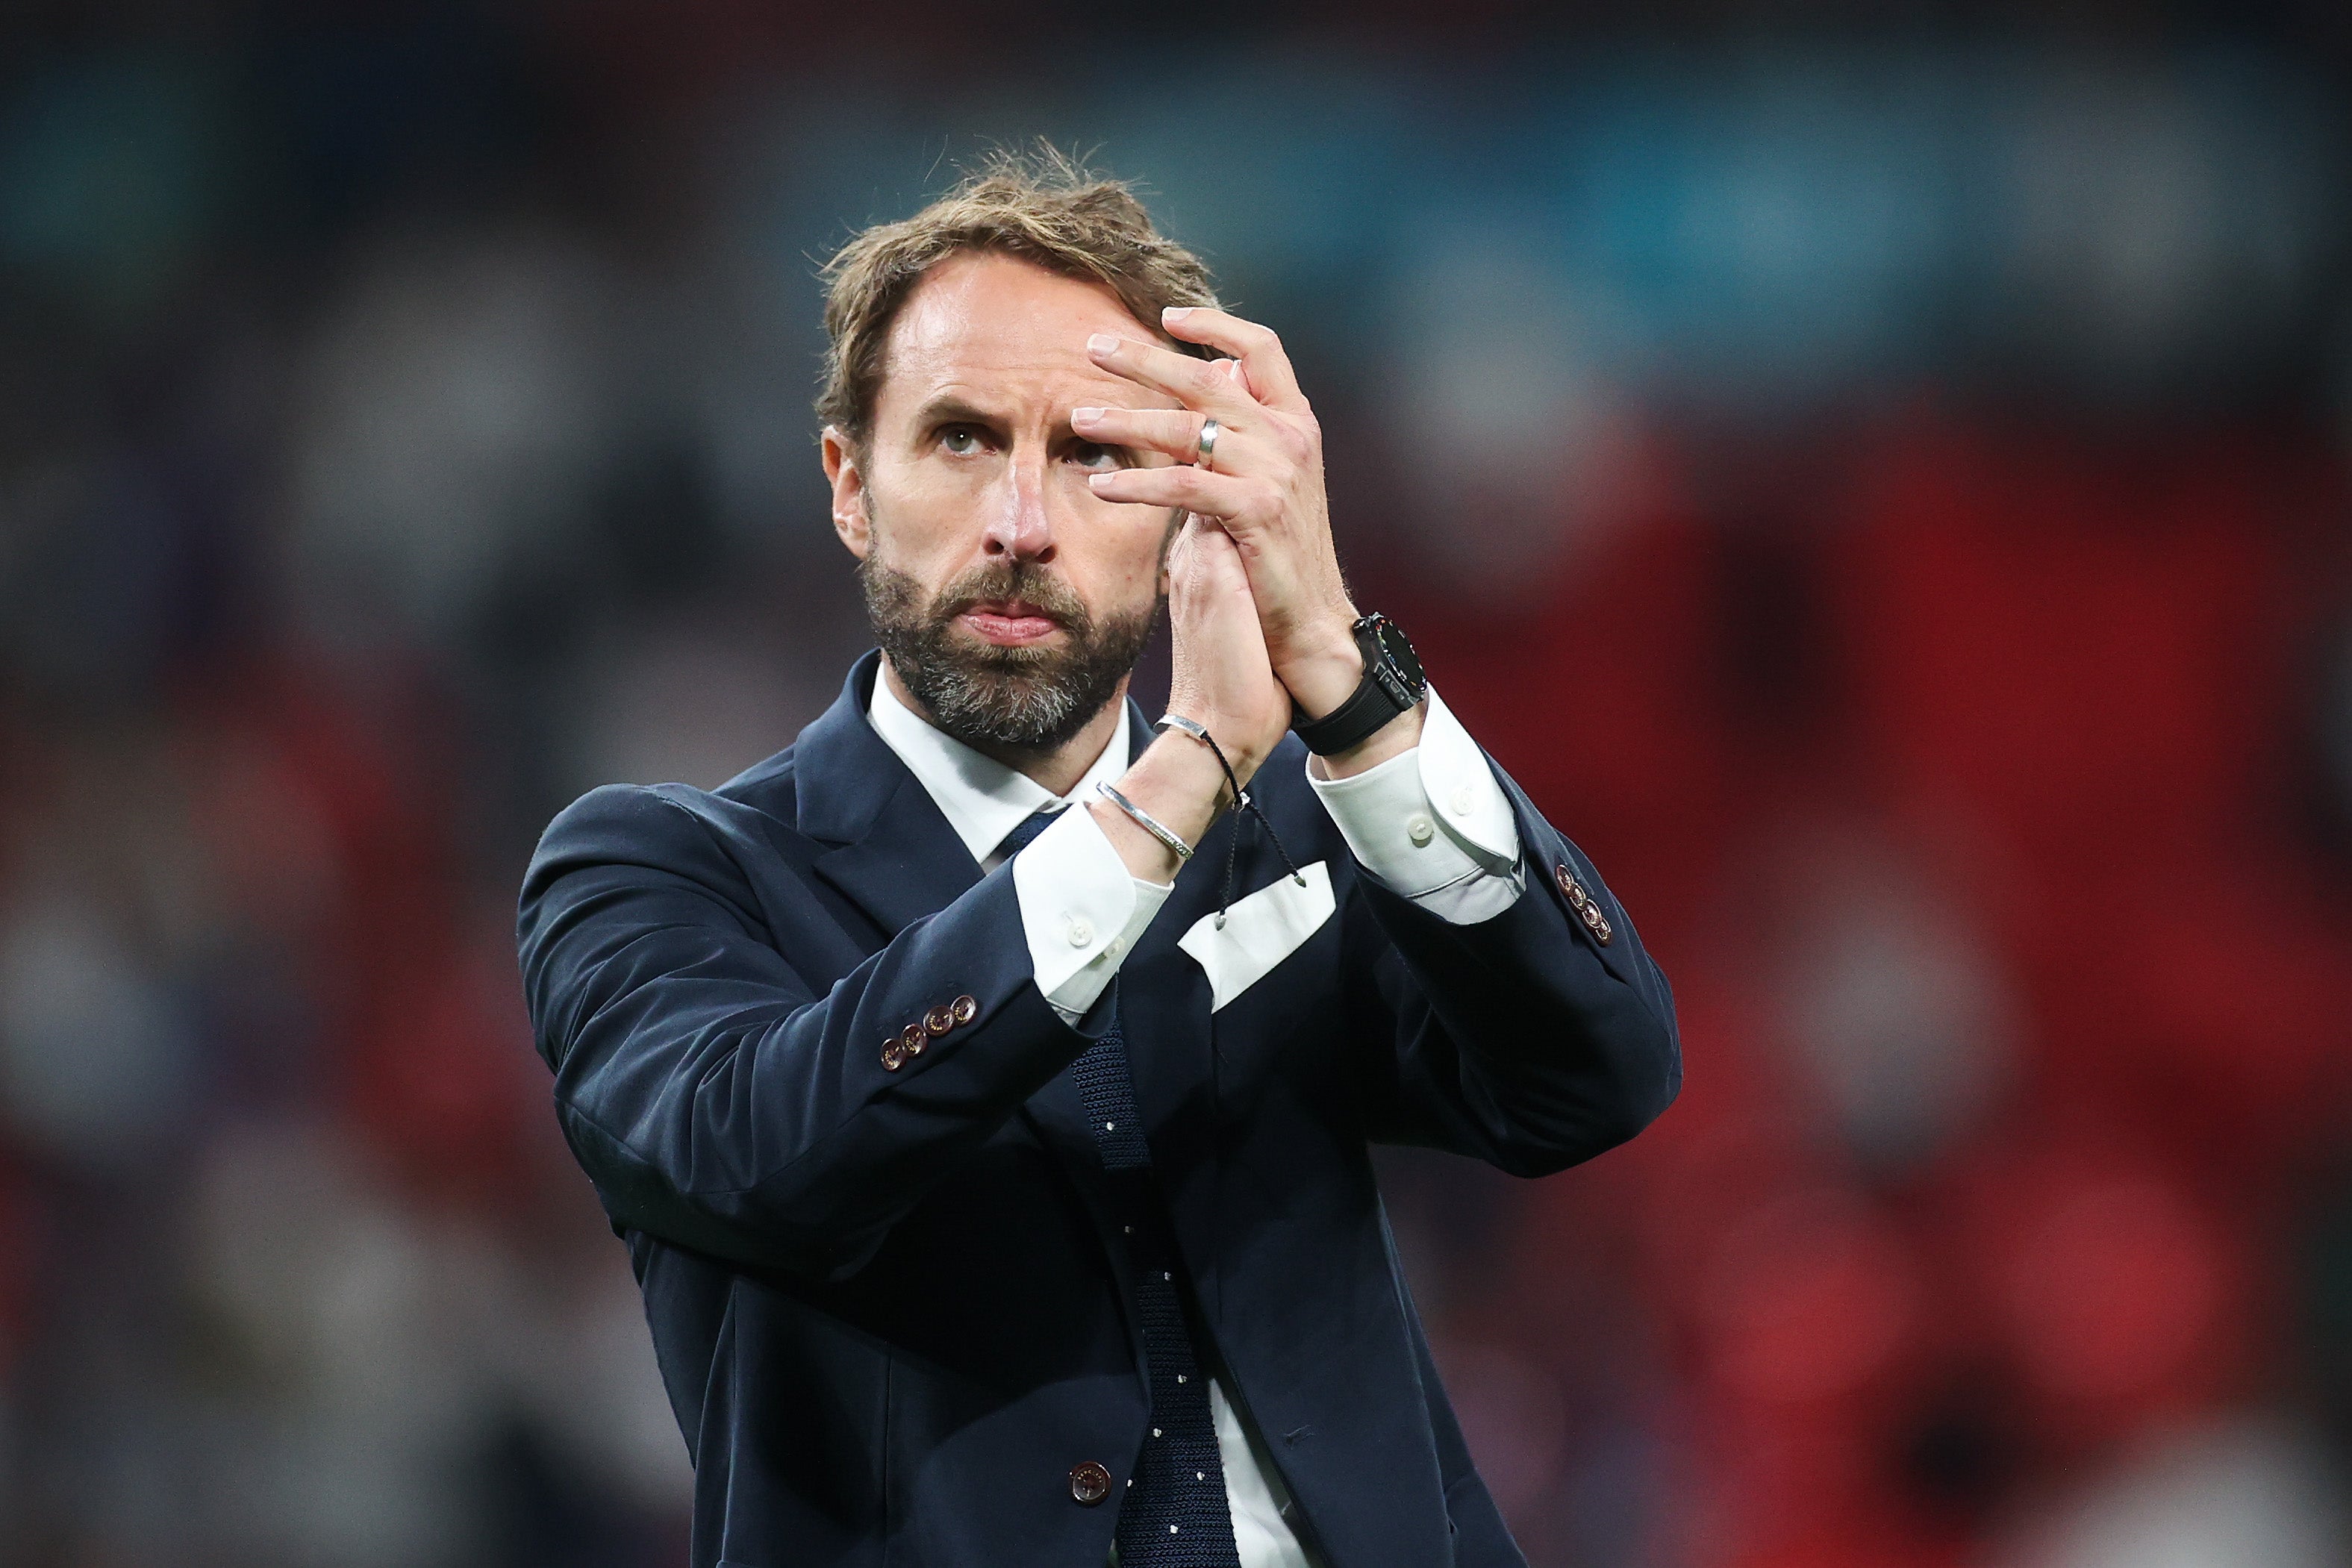 Gareth Southgate has committed to another two-tournament cycle